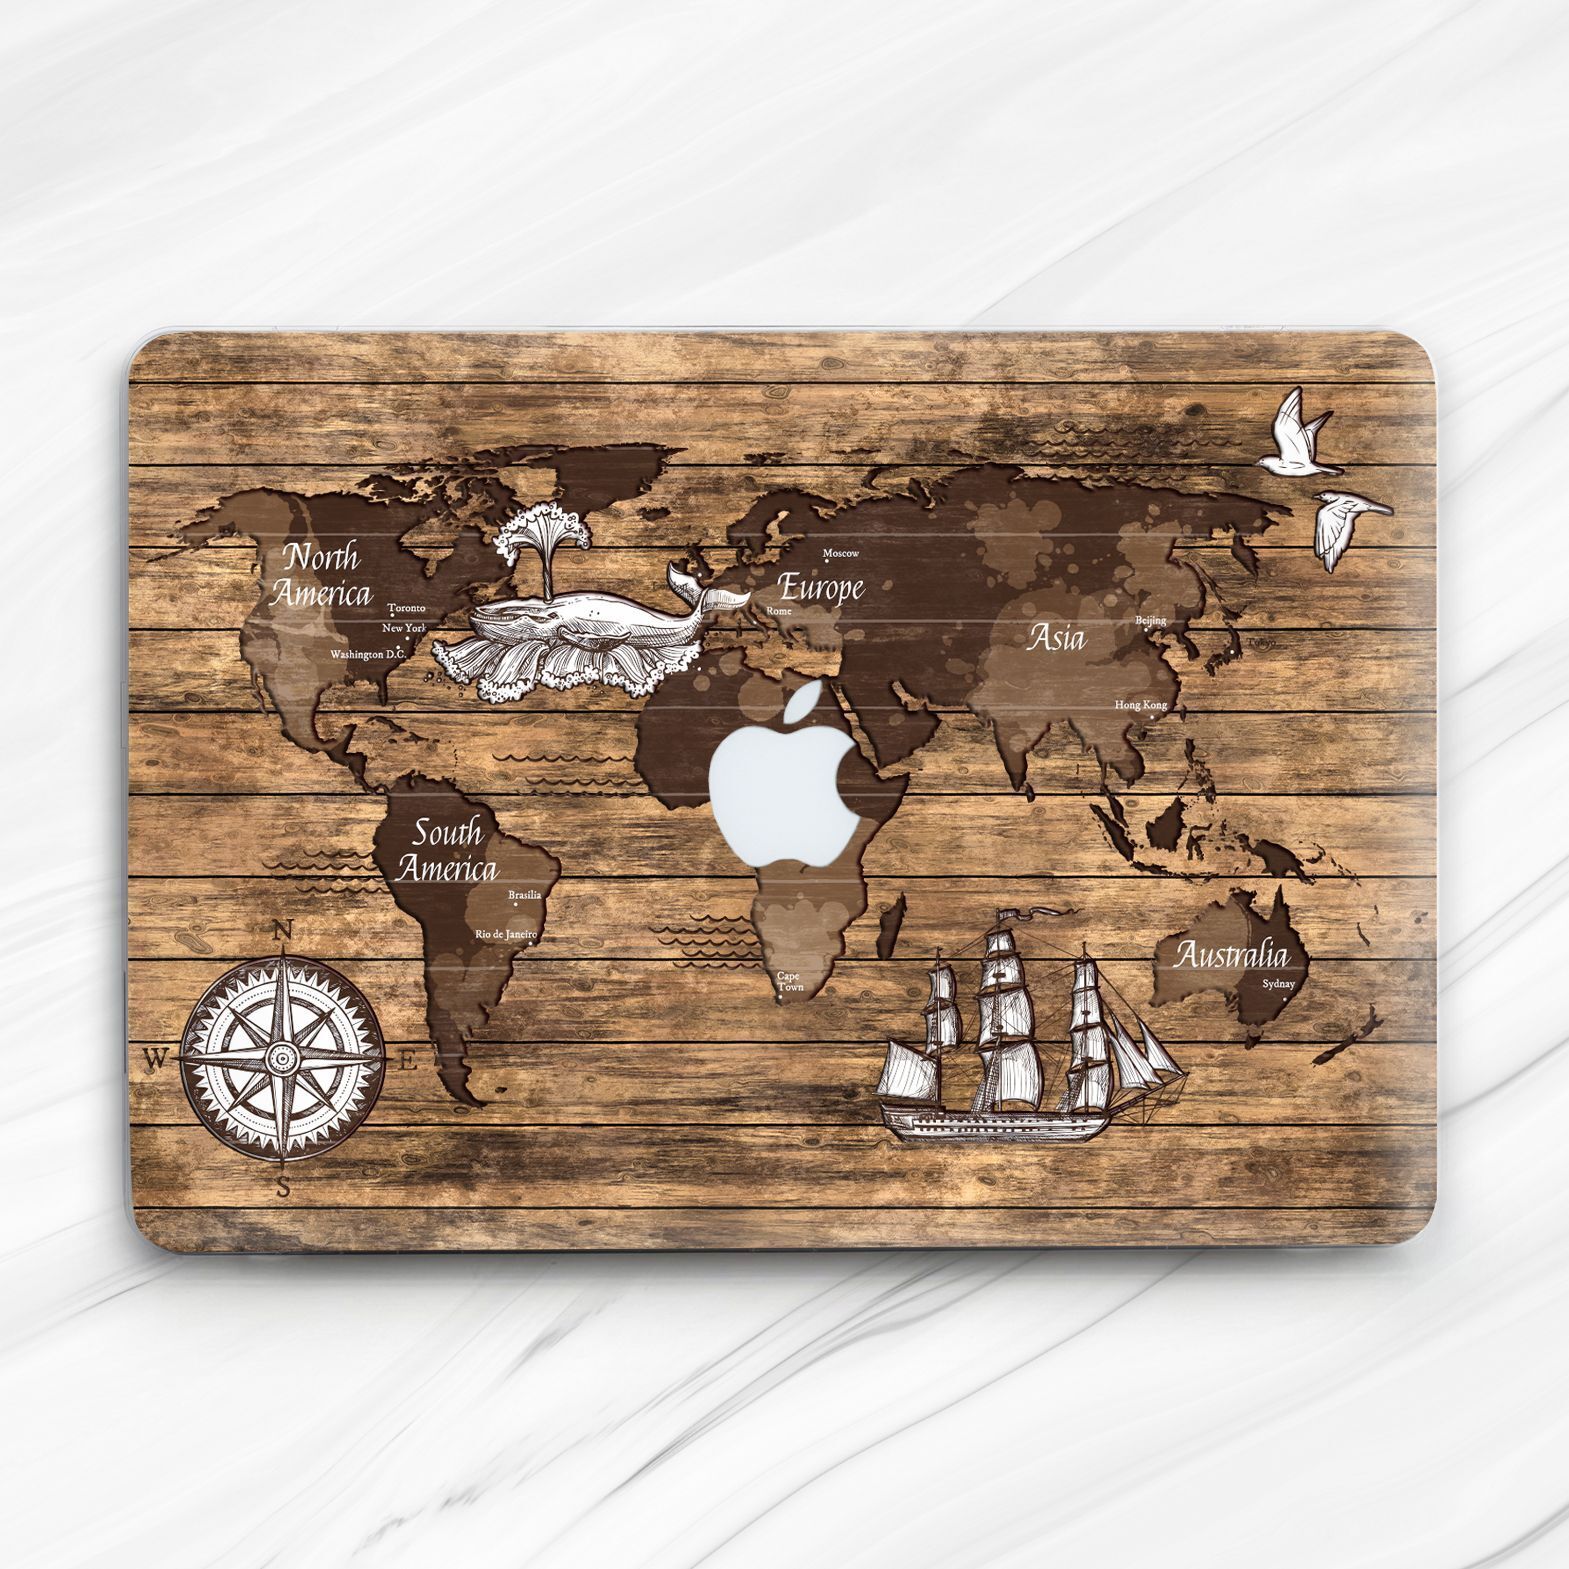 Vintage Wood World Map Aesthetic Hard Case For Macbook Air 13 Pro 16 13 14 15